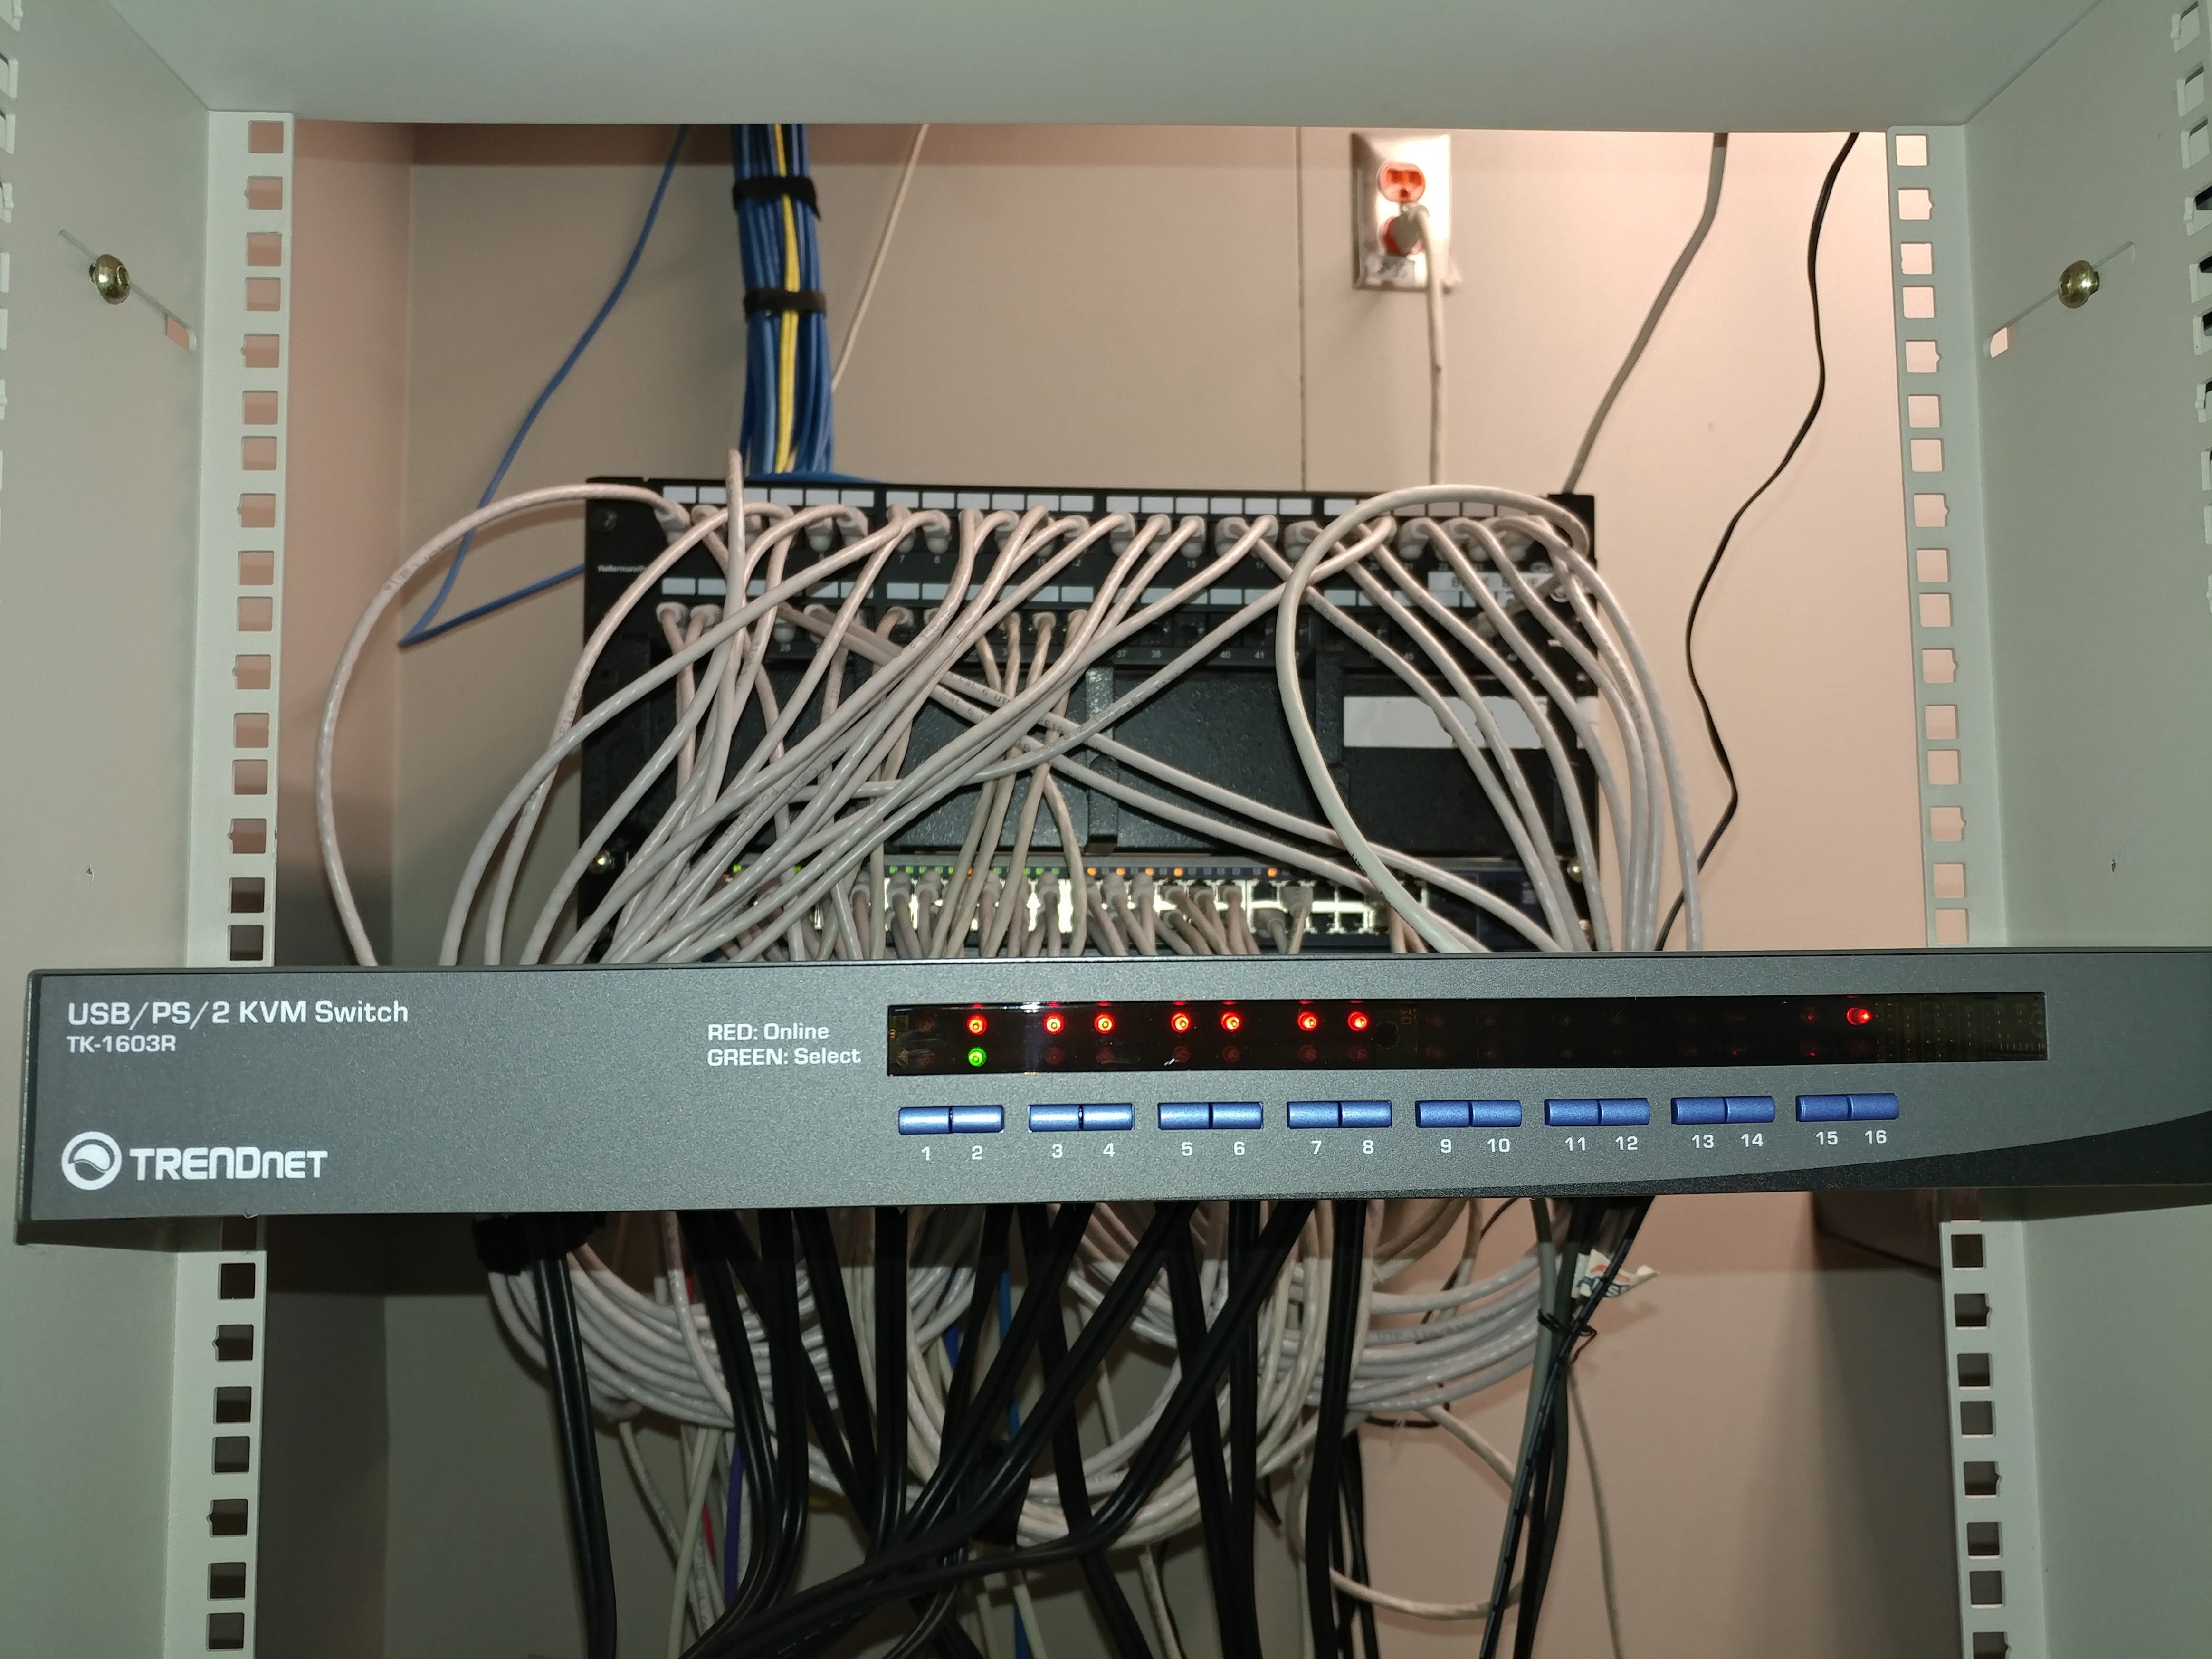 16 port kvm switch, Ethernet switches at the back